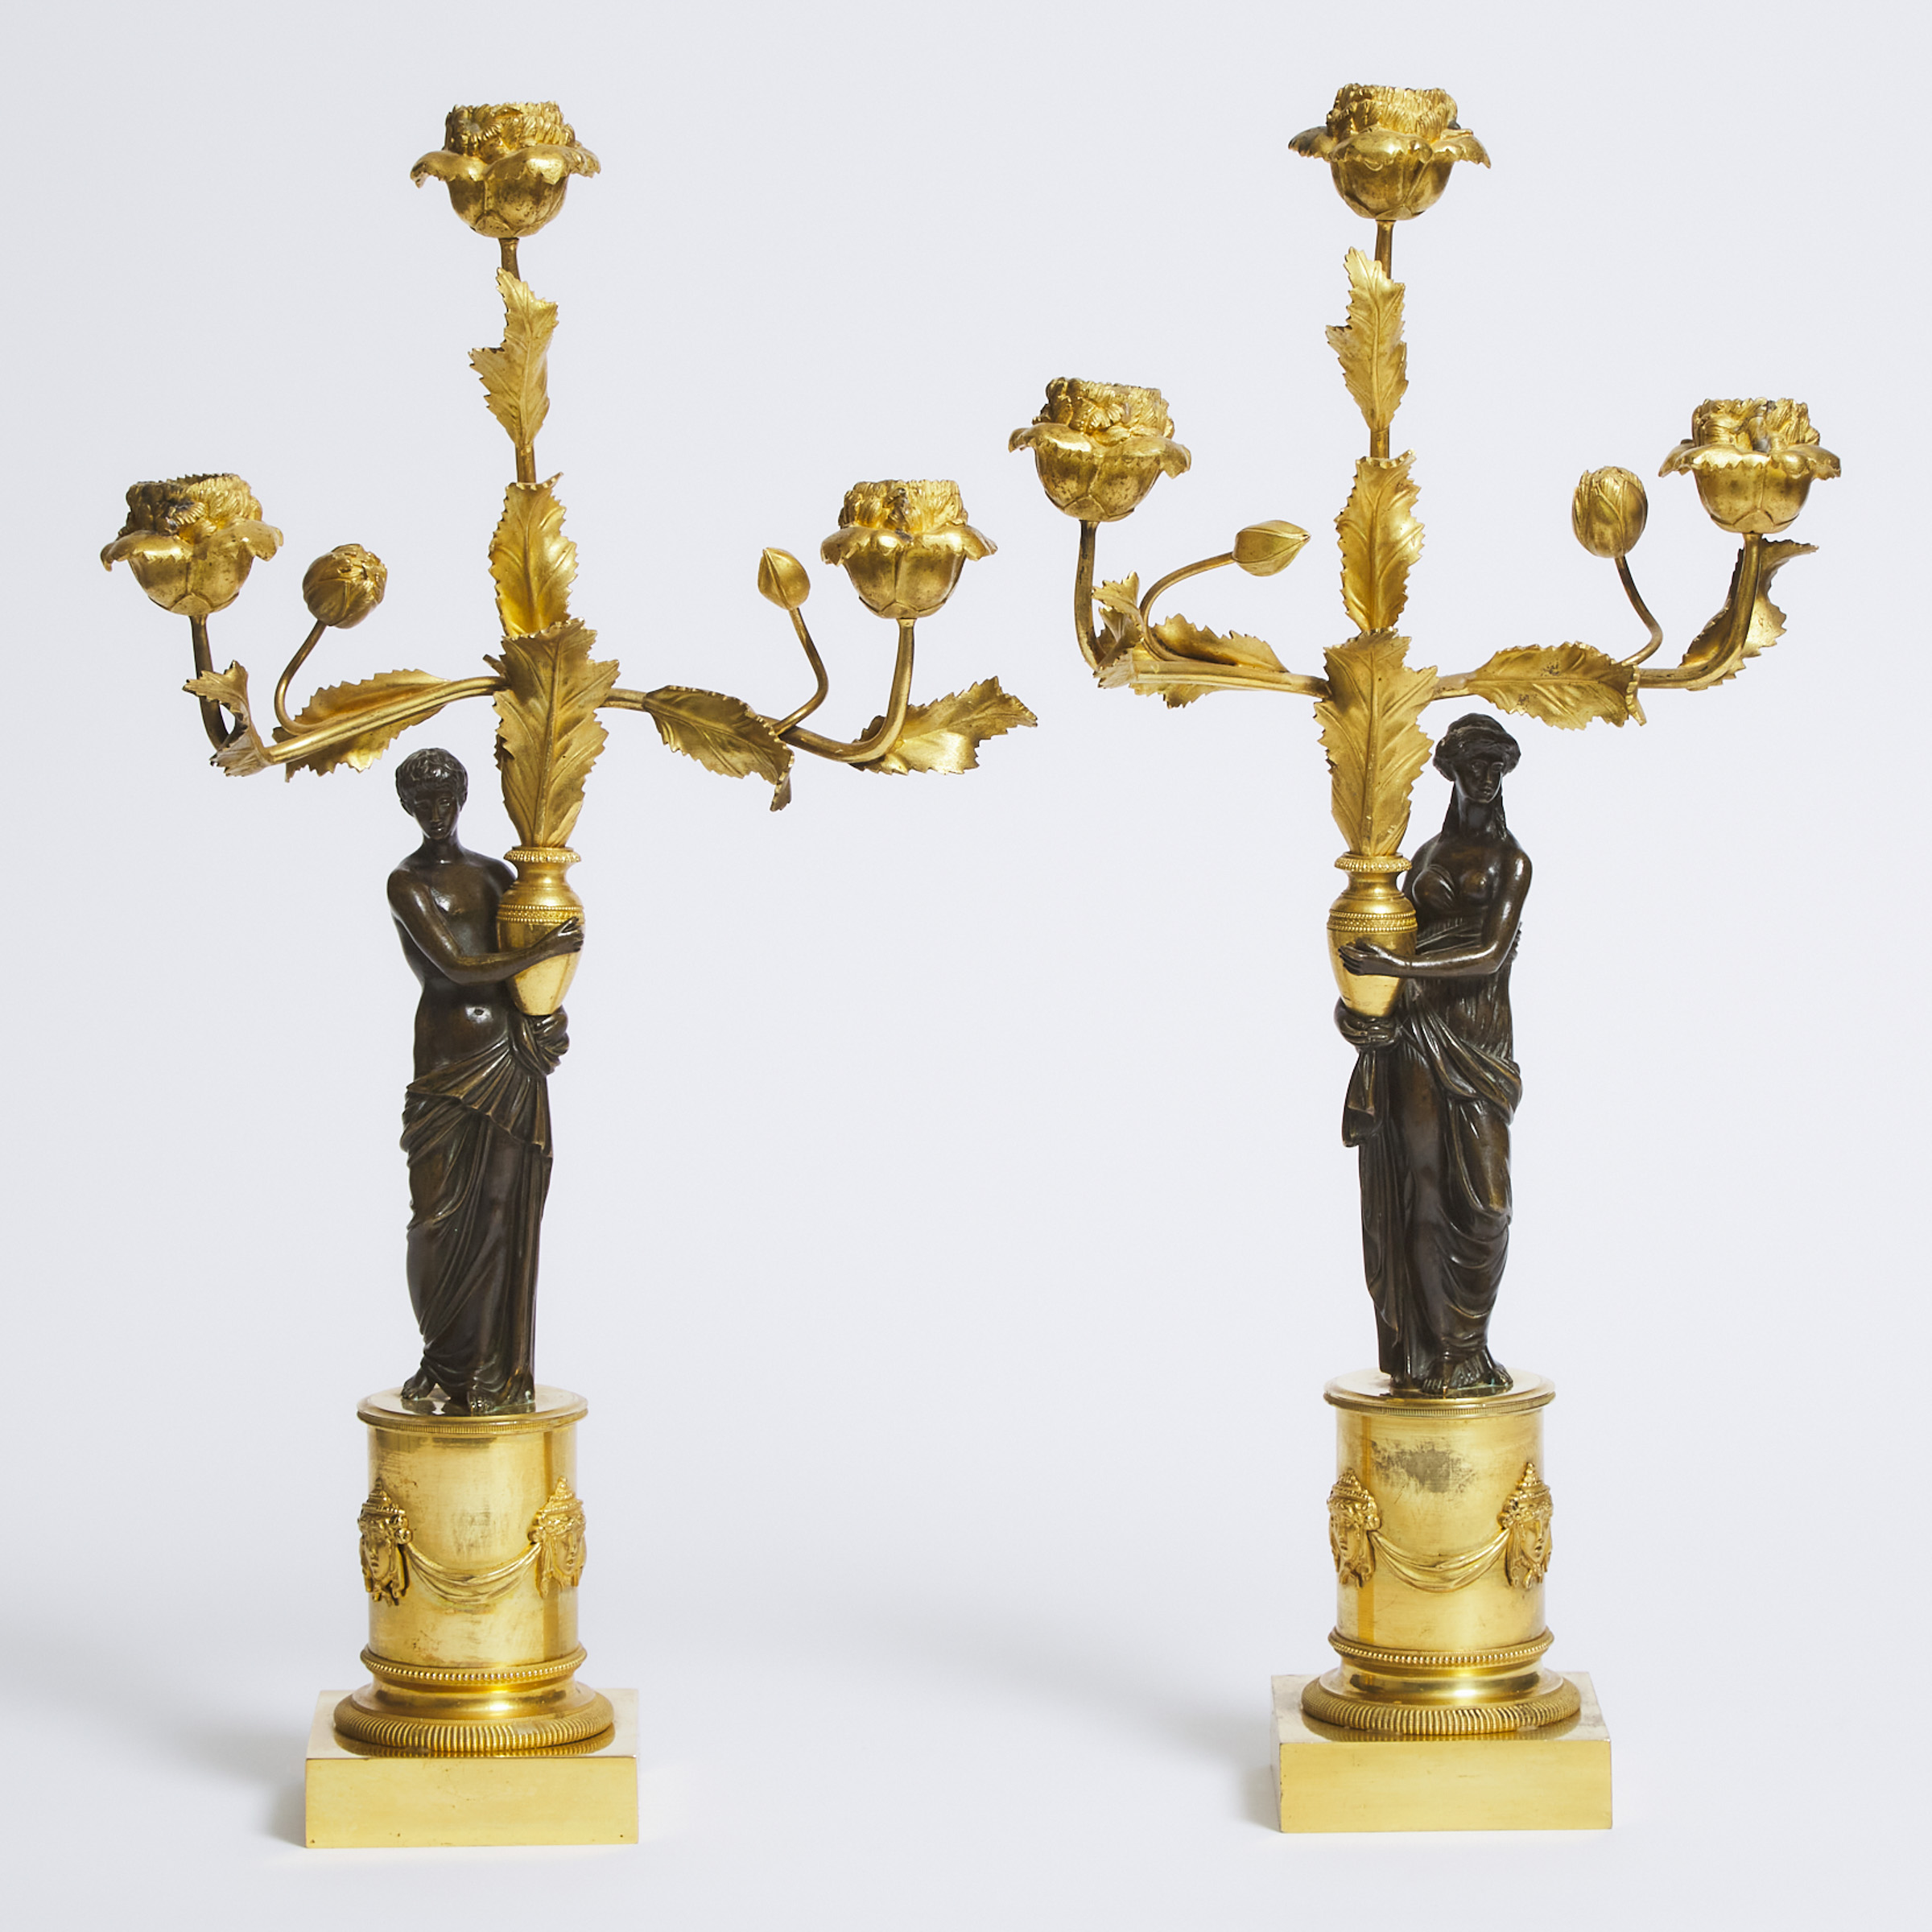 Pair of French Restauration Gilt and Patinated Bronze Three Light Candelabra, early 19th century